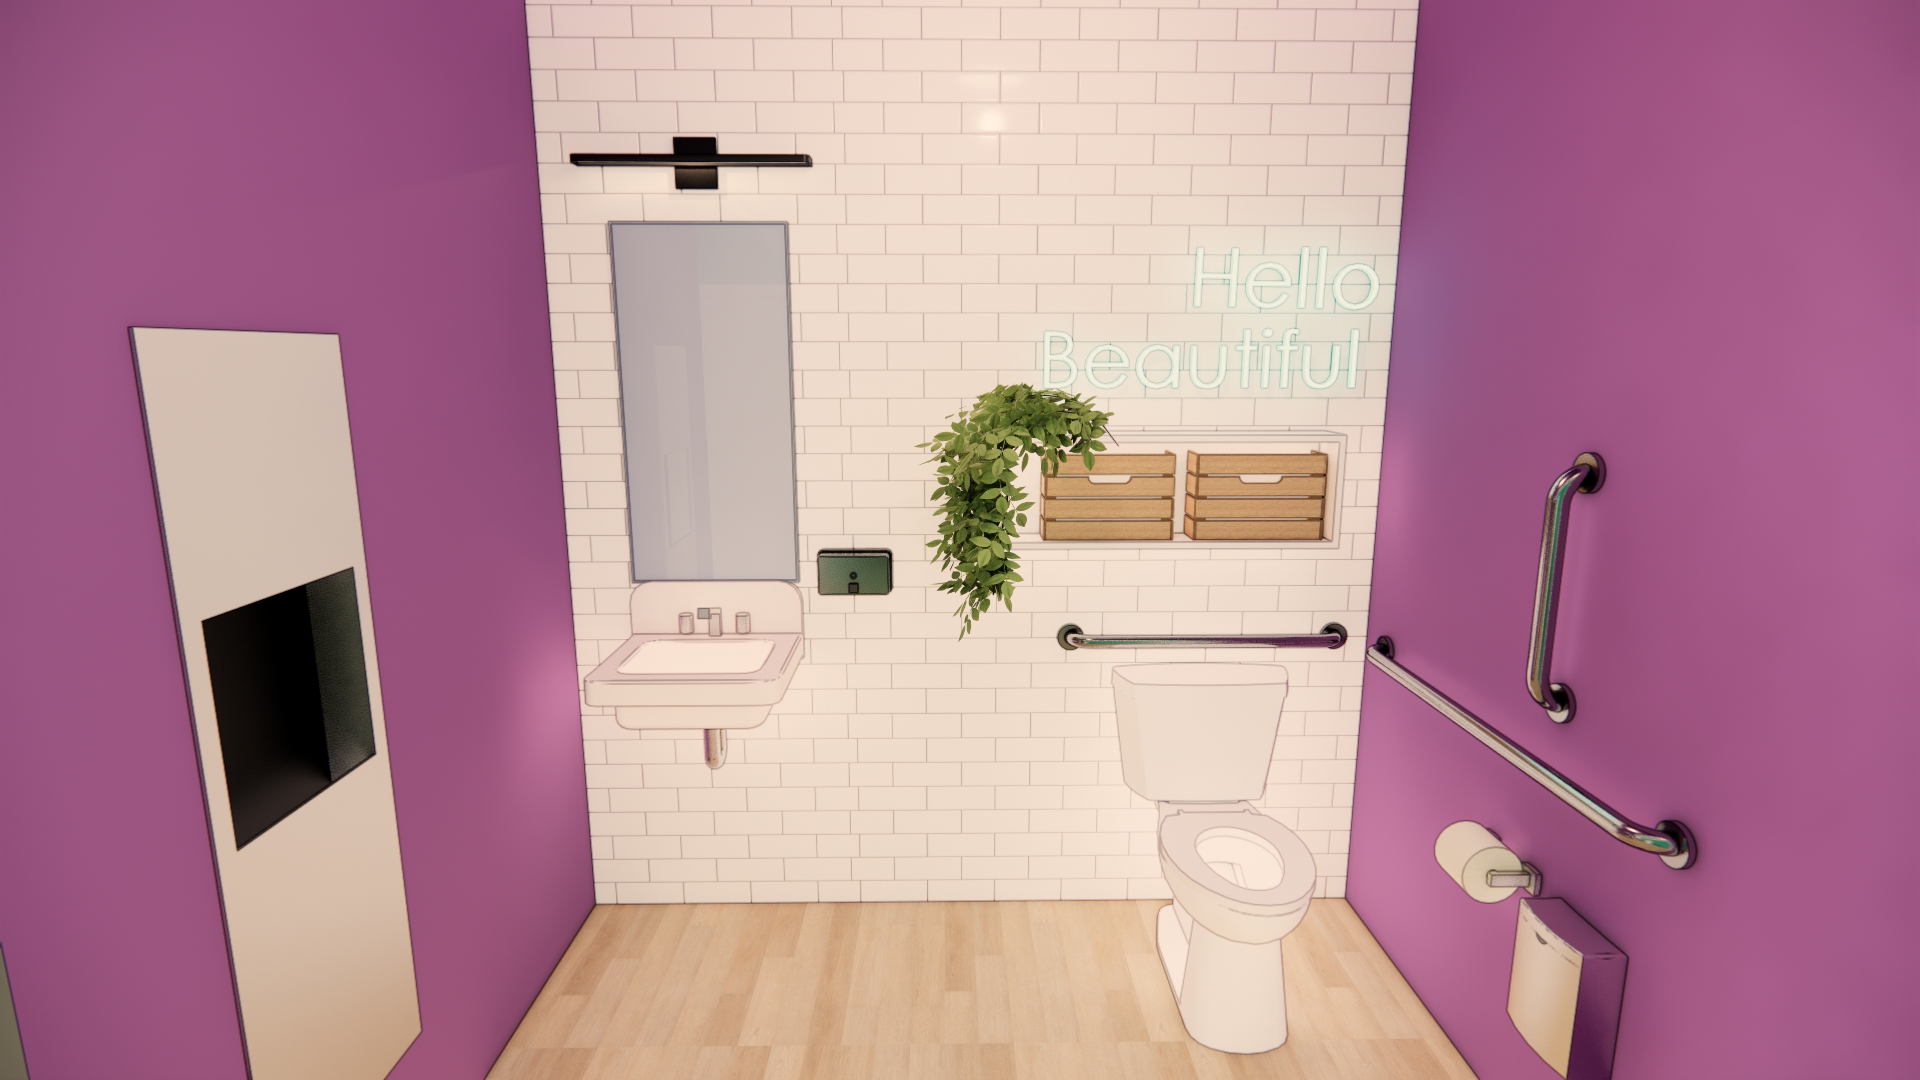 An architectural rendering of a restroom with a white tile wall and purple accents, including a neon sign that reads "hello beautiful" over a handicap accessible railing.